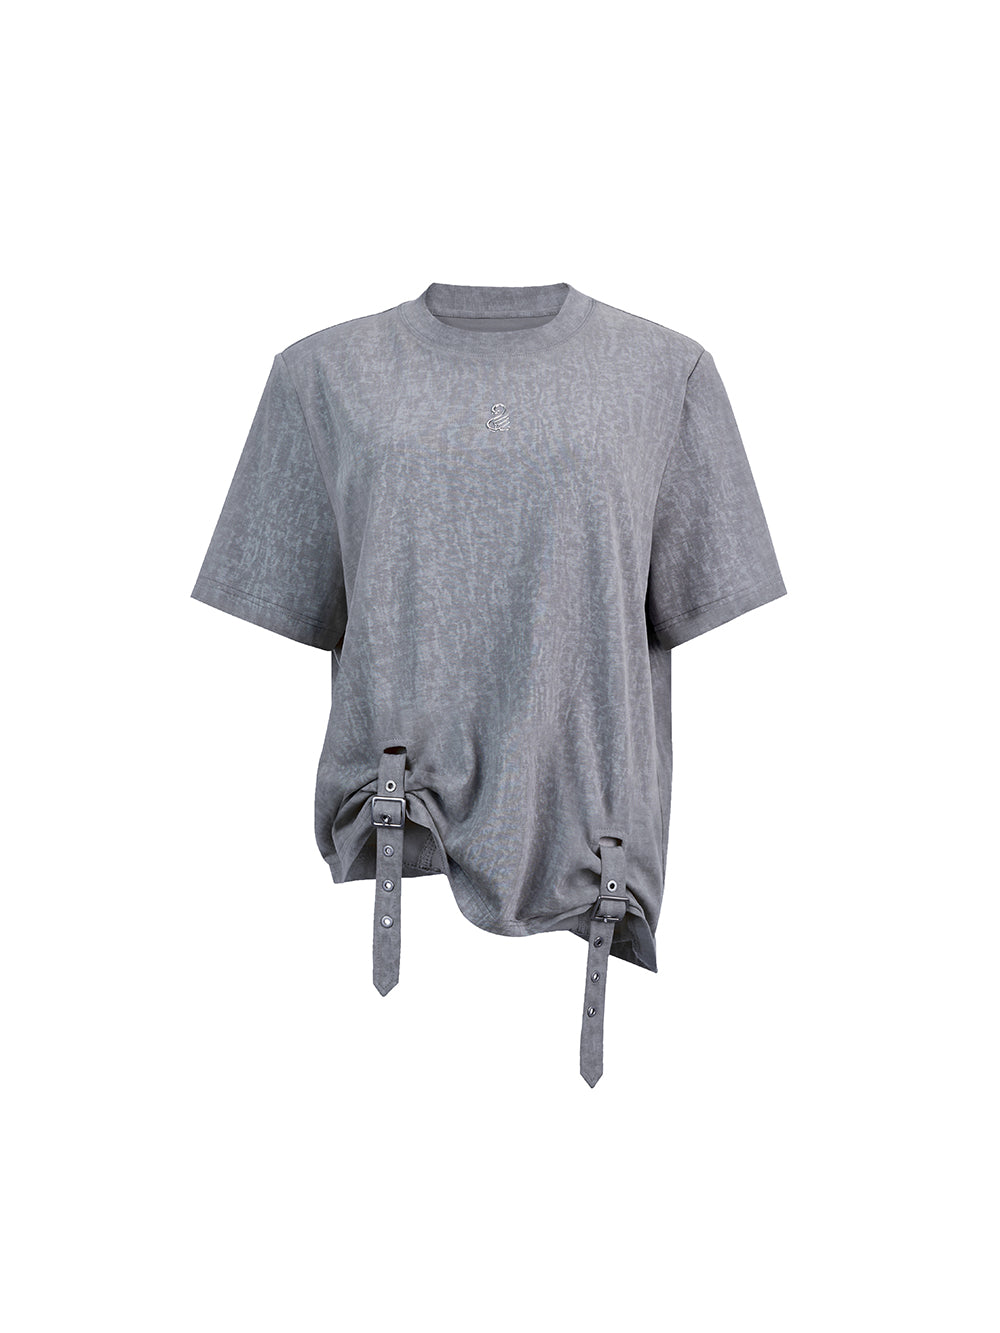 MUKTANK×WESAME Knitted Asymmetrical Lace-up T-shirts